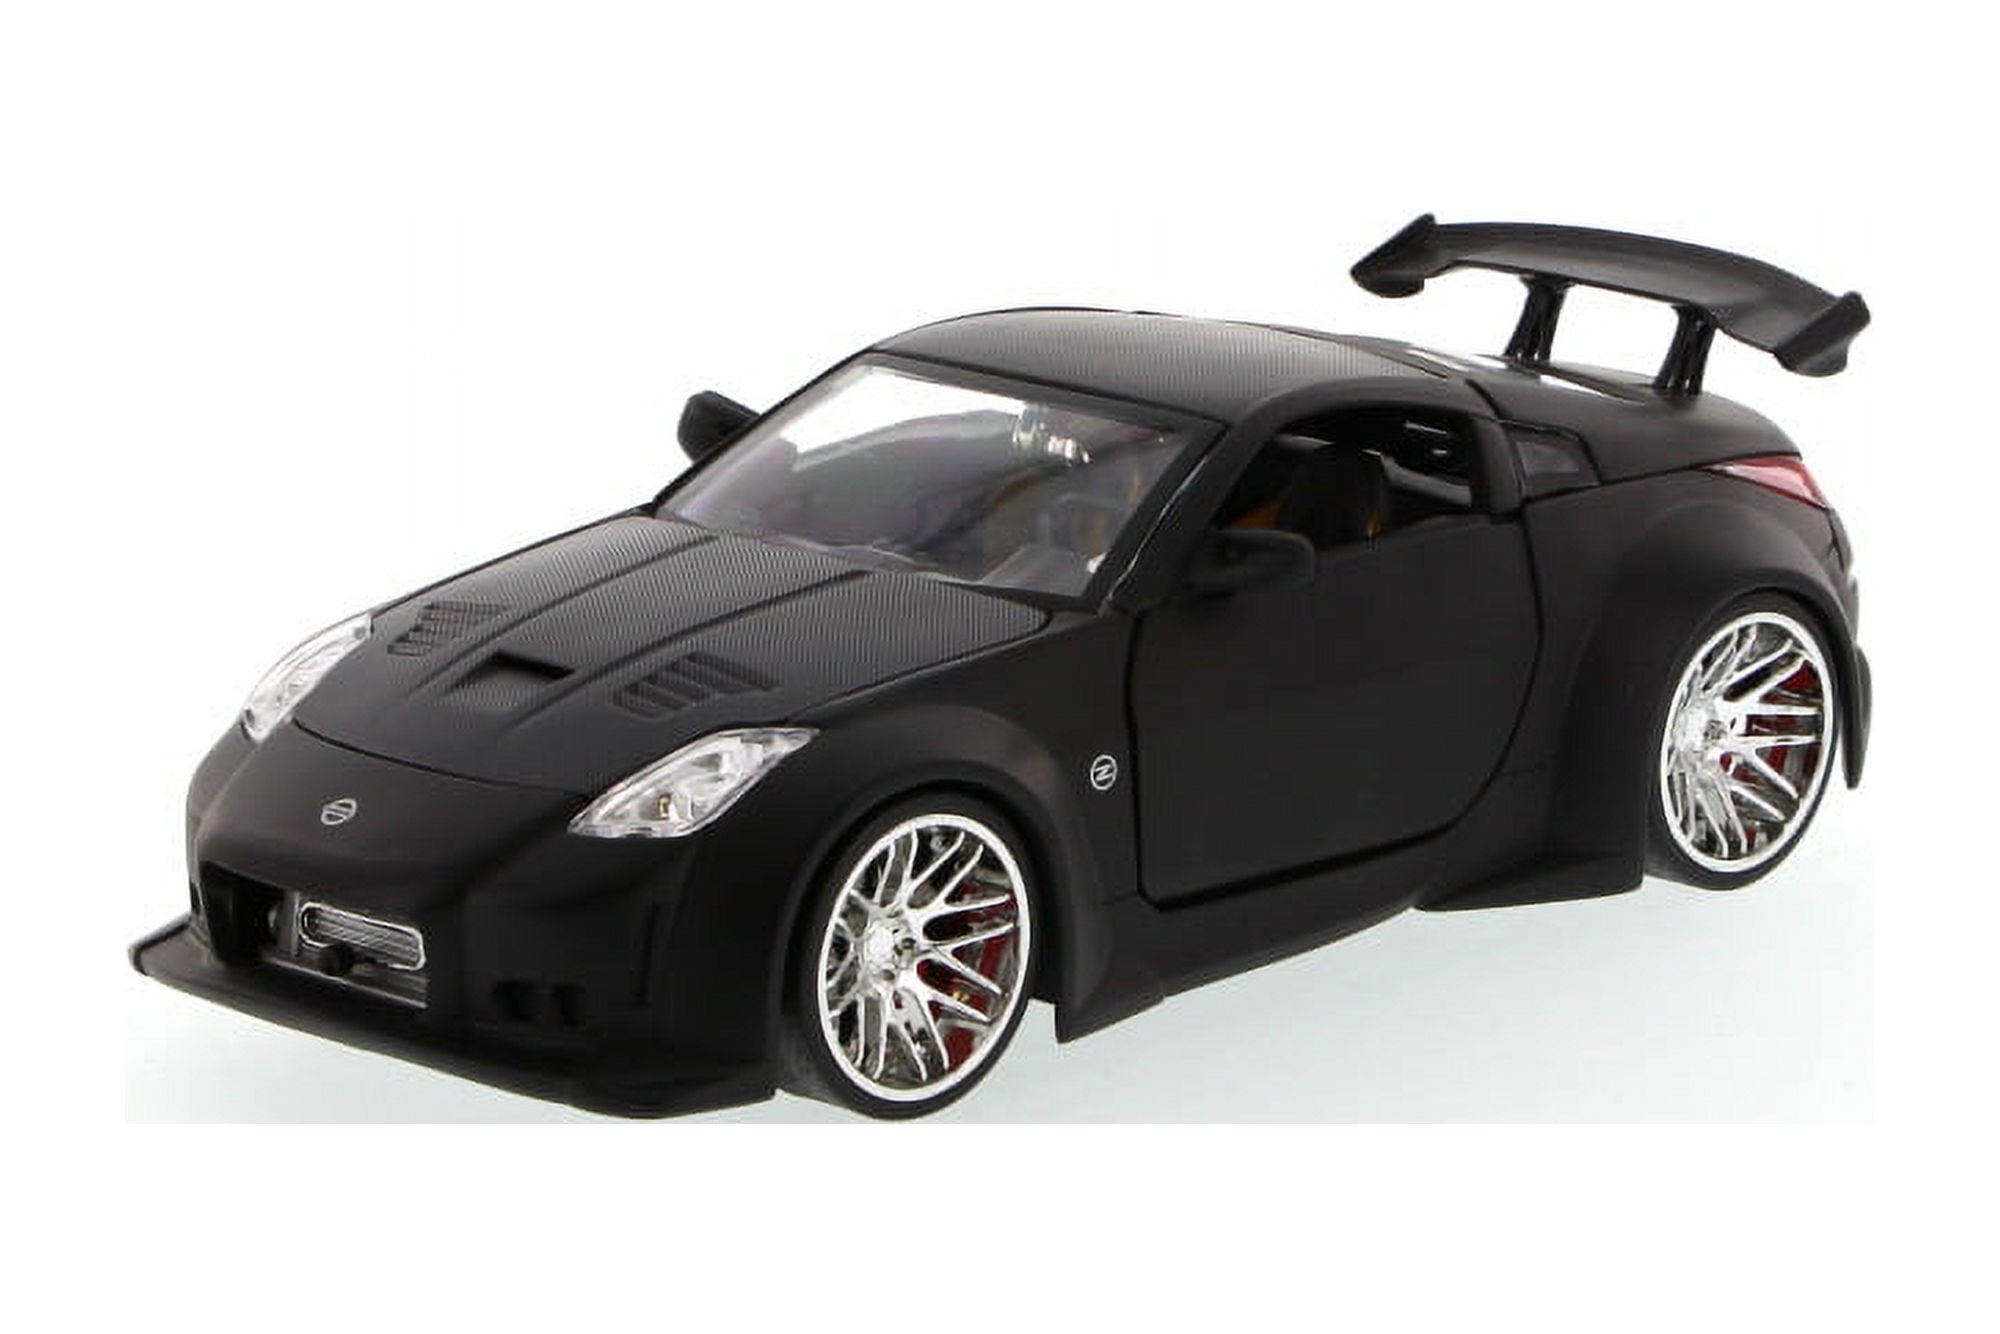 Nissan 350Z, Black - Jada Toys Bigtime Kustoms 92354 - 1/24 scale Diecast  Model Toy Car (Brand New, but NOT IN BOX)